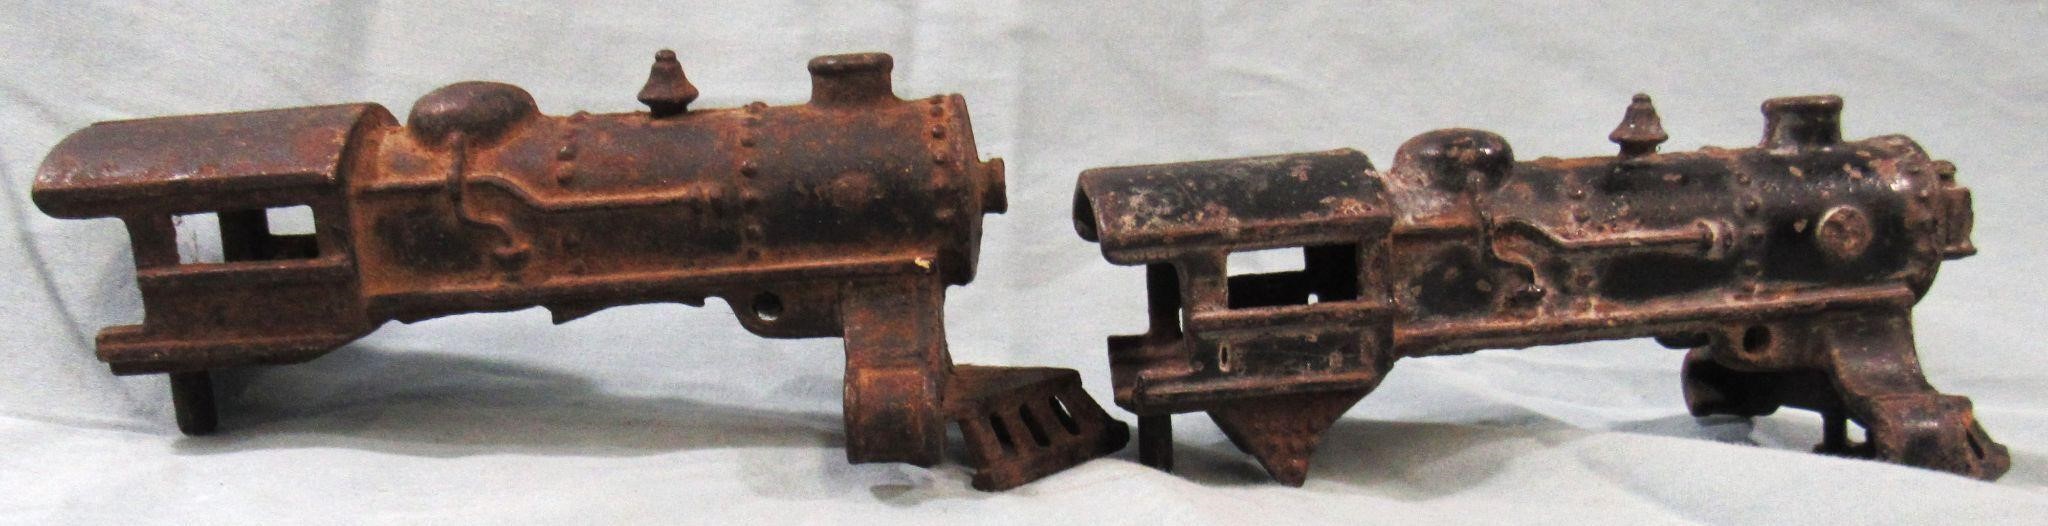 2 VINTAGE CAST IRON TRAINS-AS IS